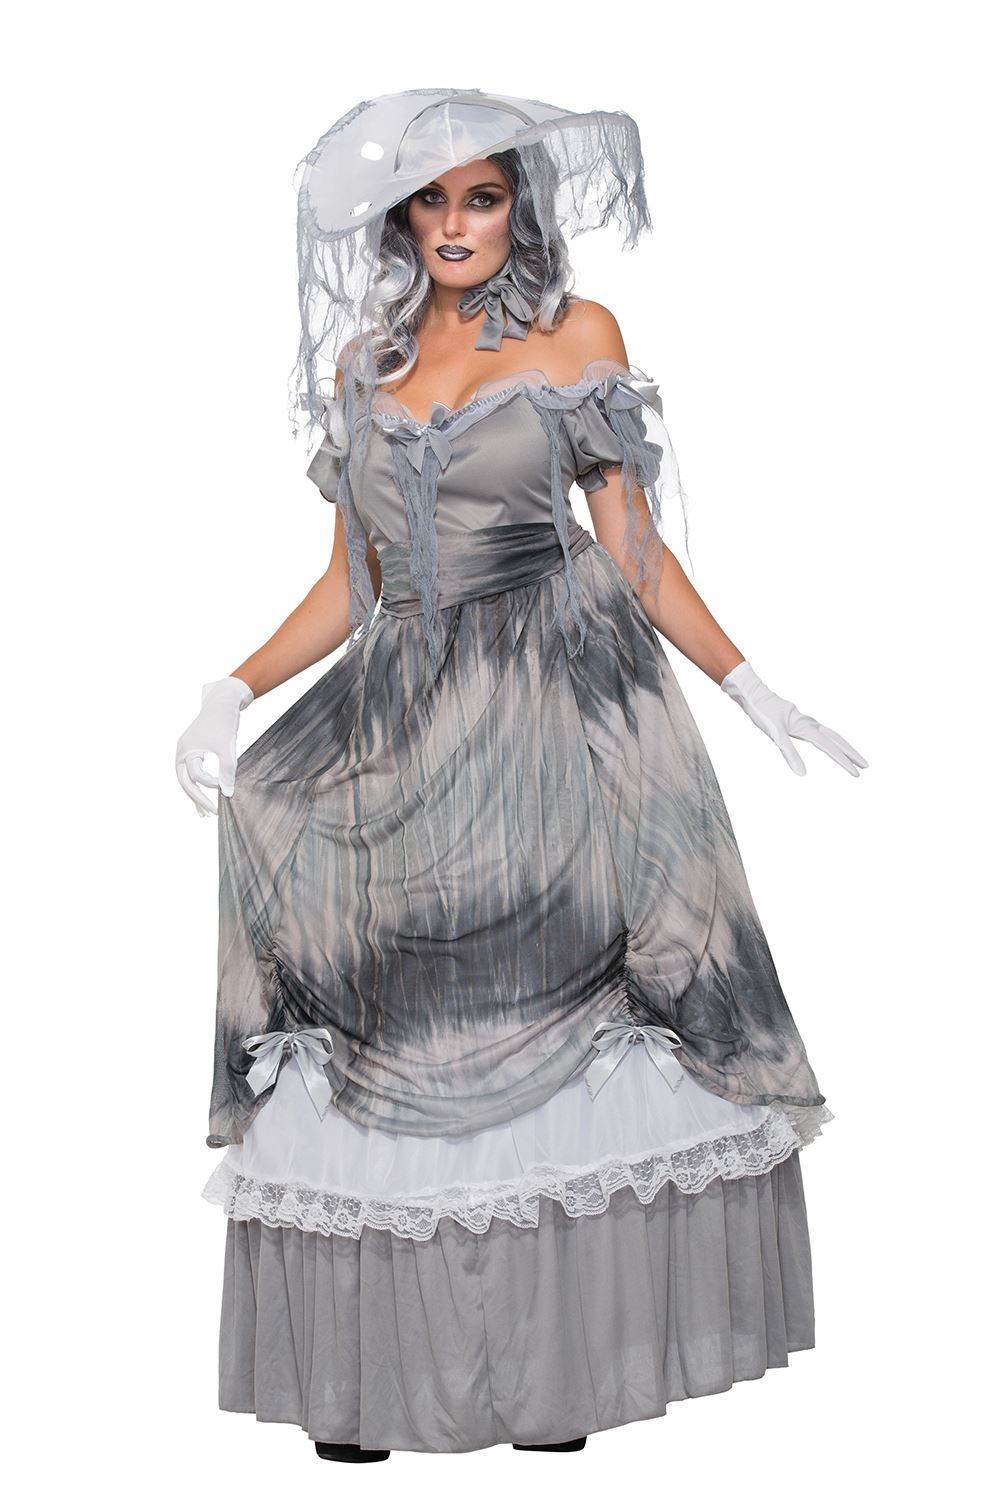 Adult Zombie Dead  Bride  Woman Costume  35 99 The 